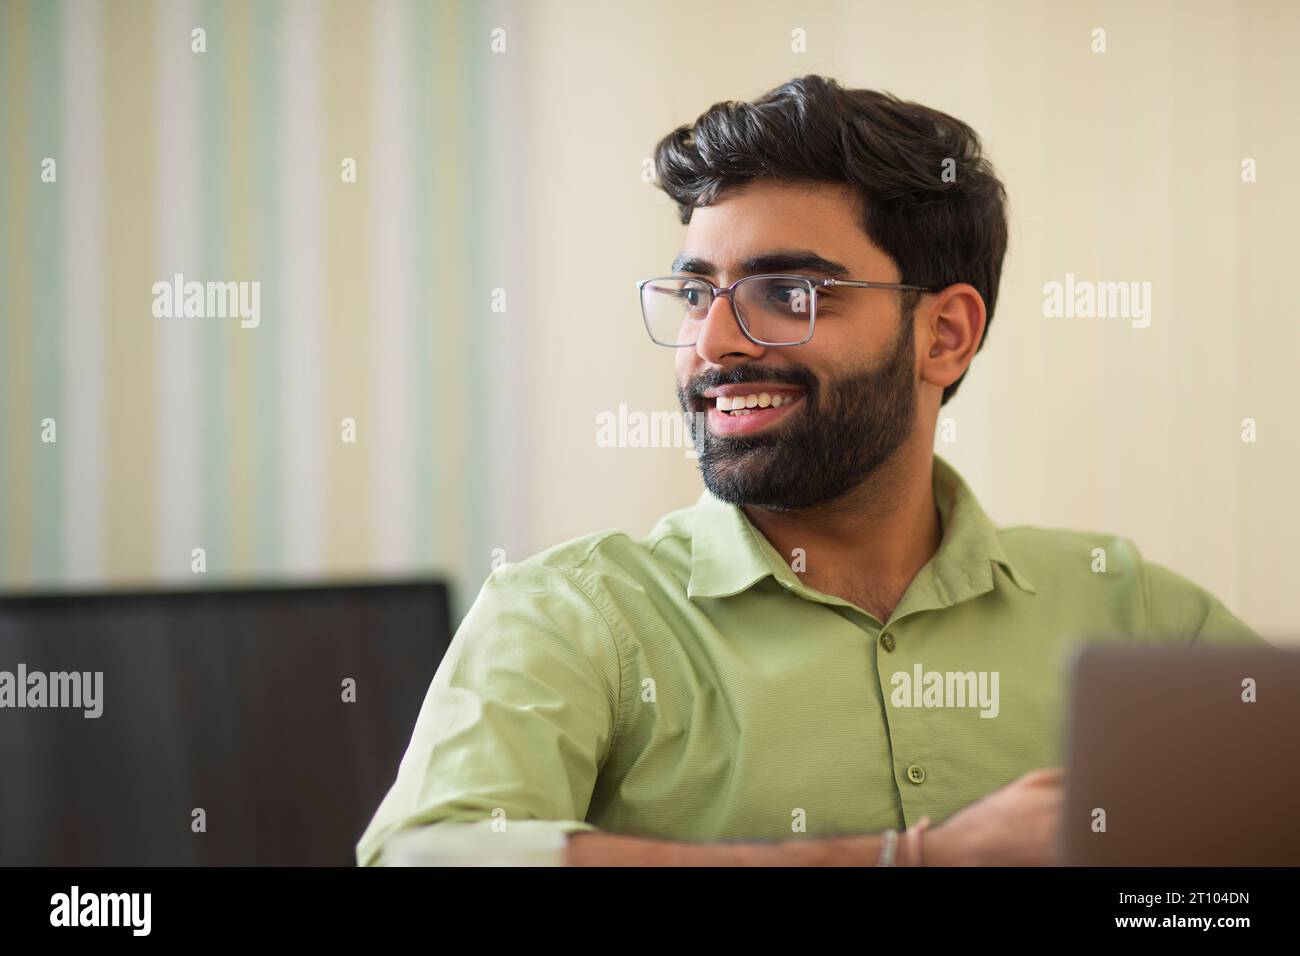 Close-up portrait of young man working with laptop in his home office Stock Photo